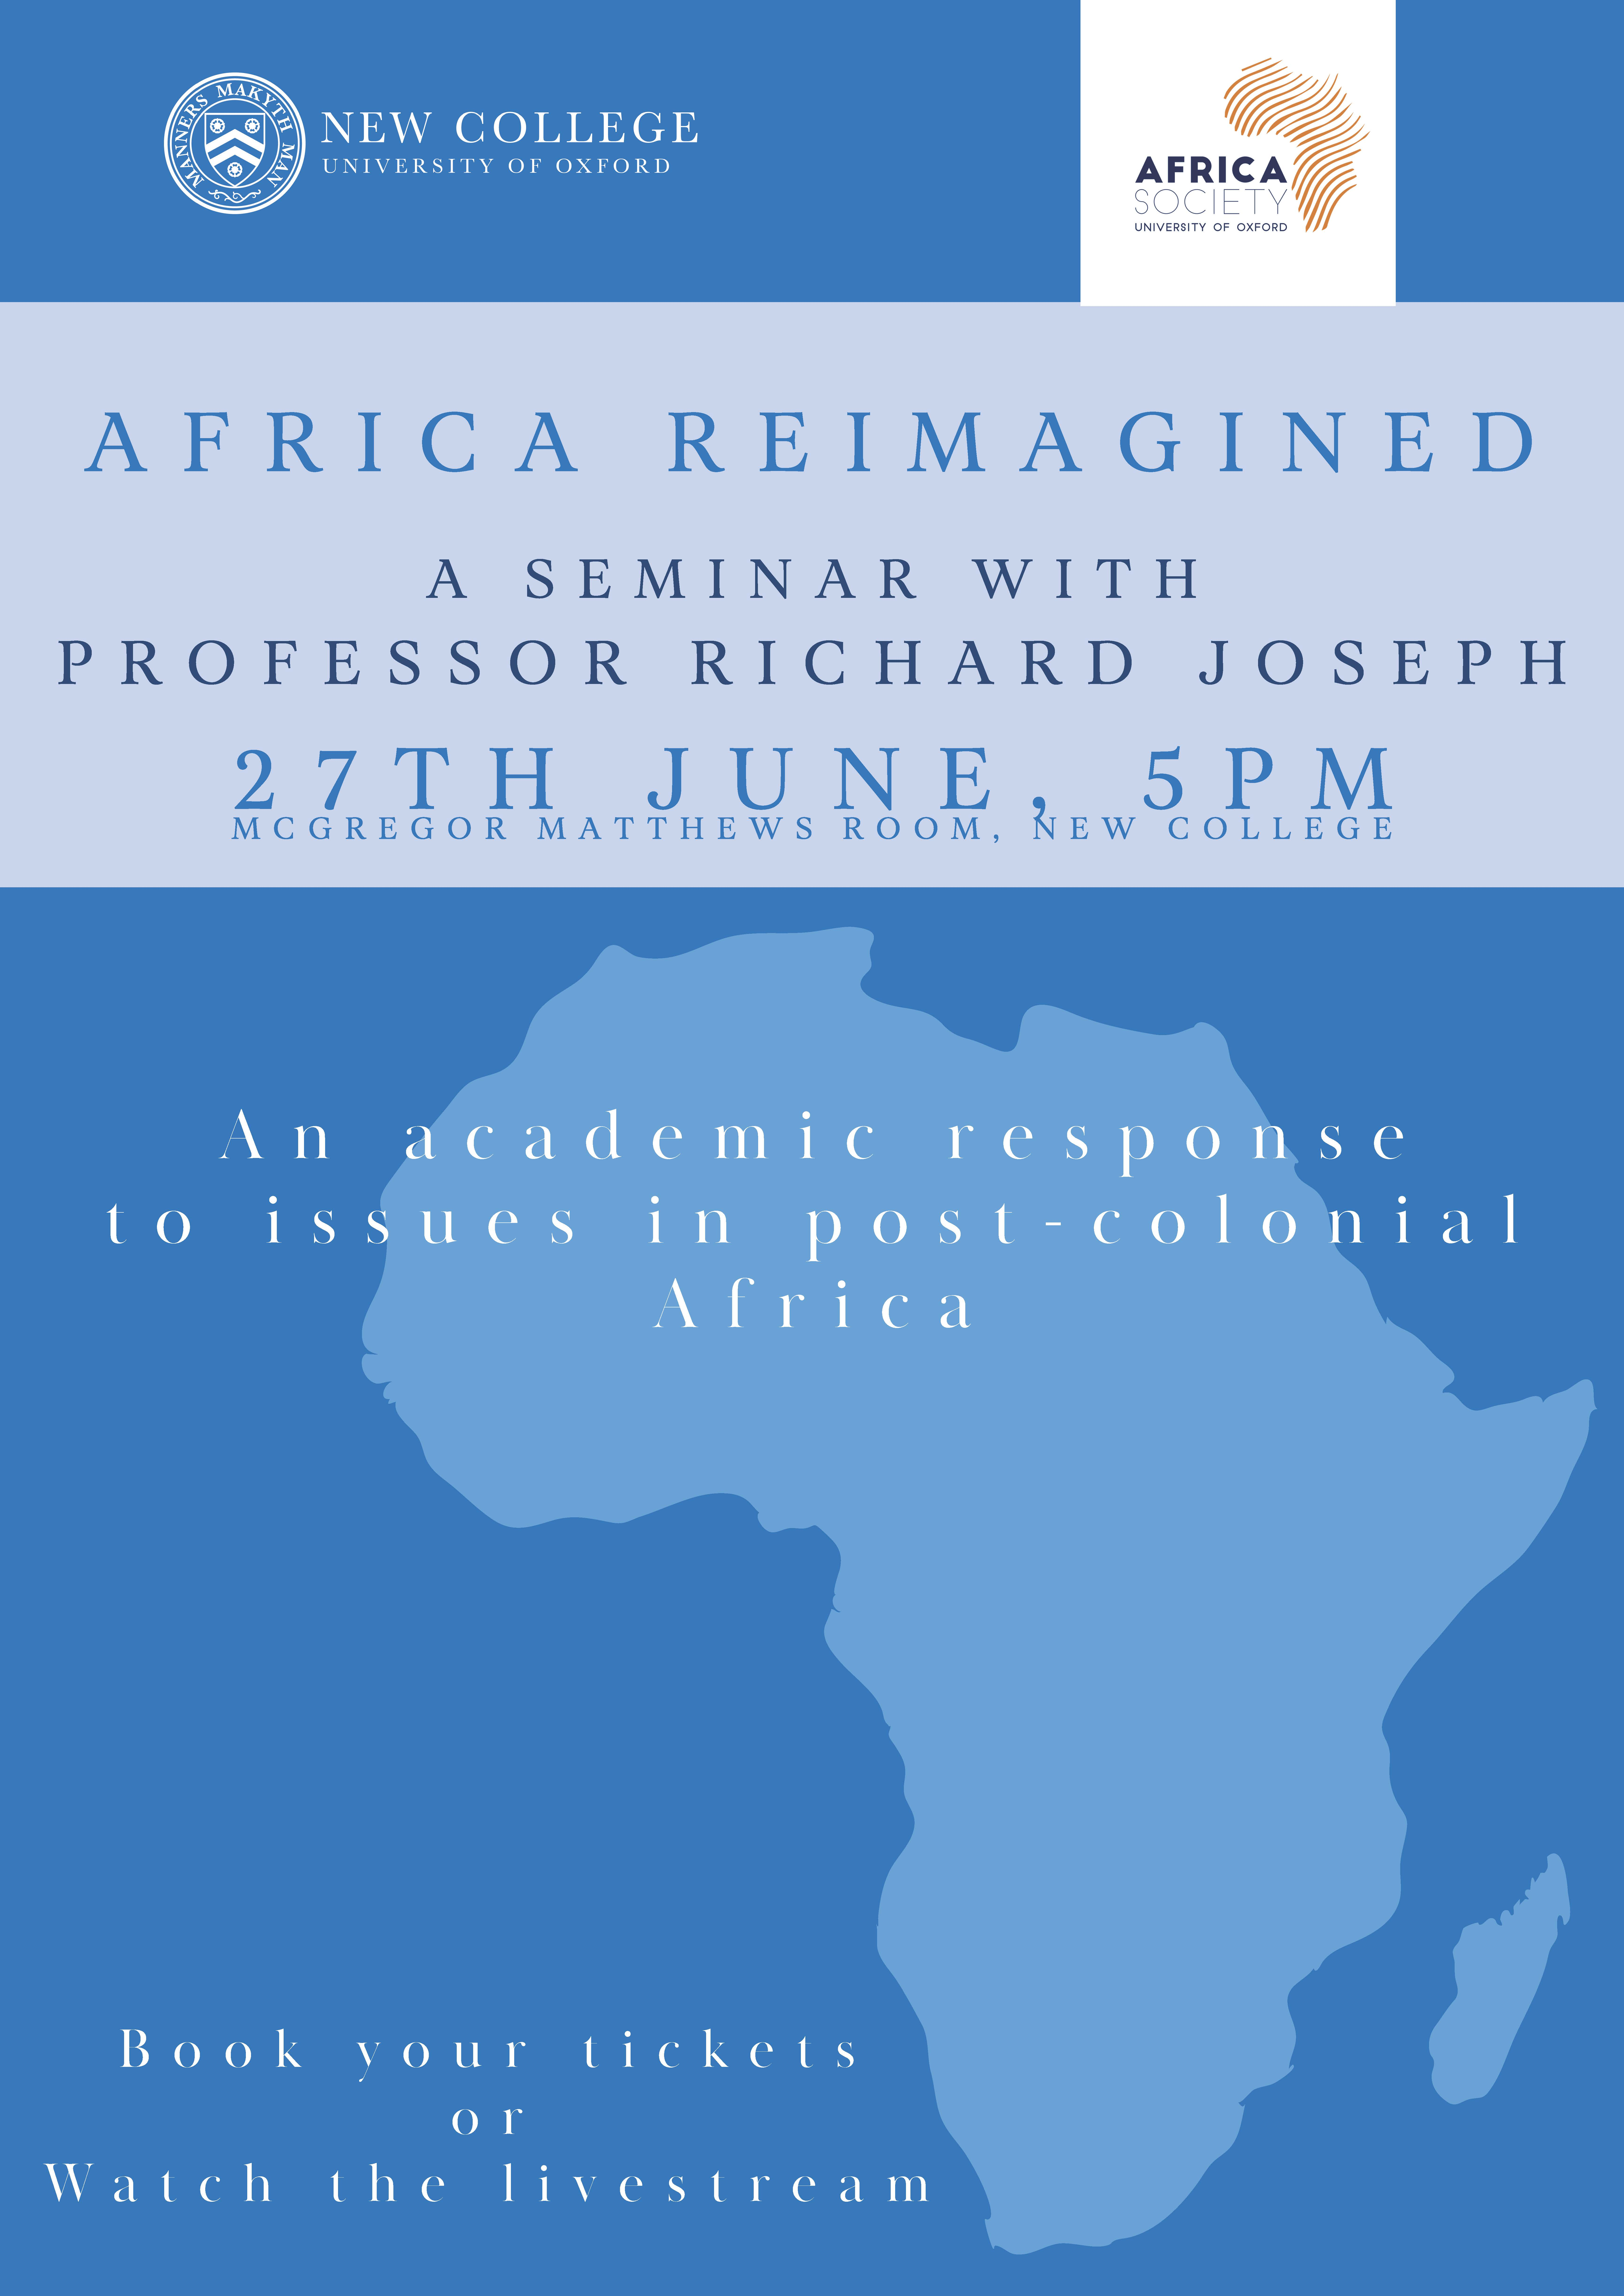 Details of the seminar superimposed on a blue background with illustration of African continent